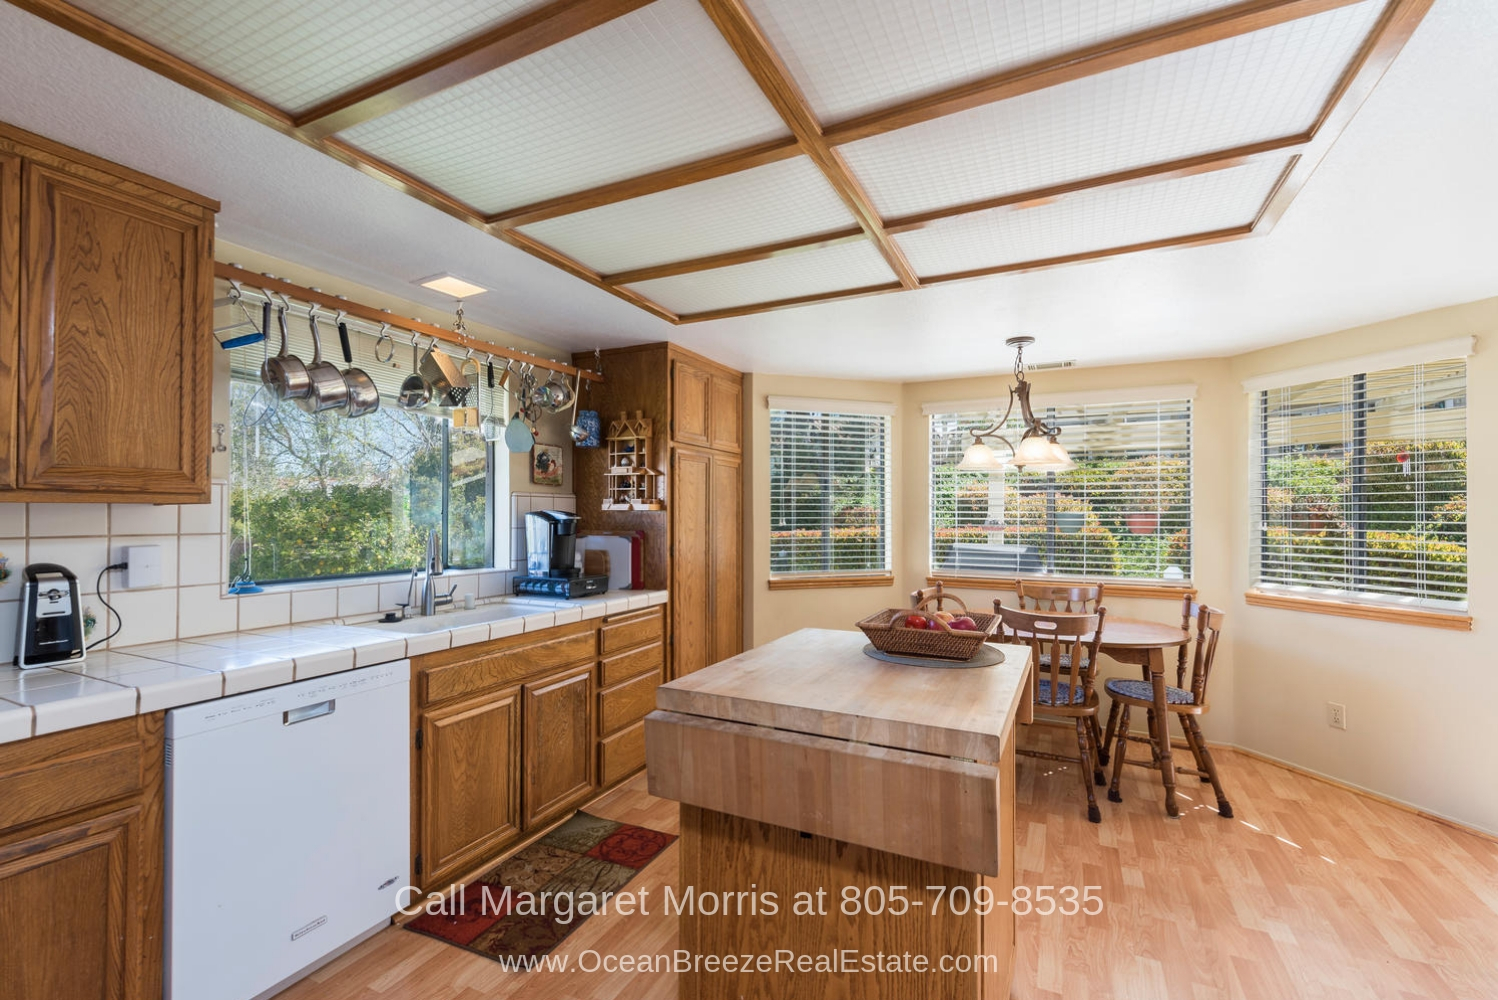 Nipomo CA  Real Estate Properties for Sale - The large and well-lighted kitchen of this Nipomo home for sale will surely thrill your inner chef. 